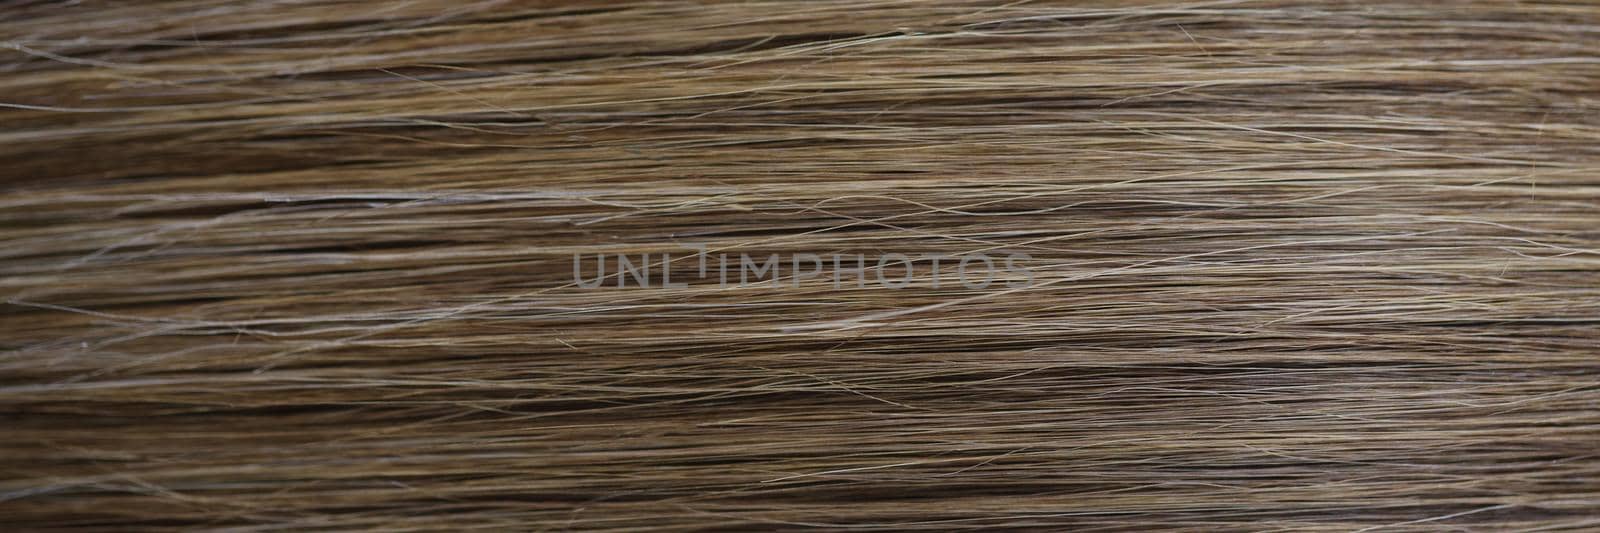 Close-up of straight chestnut natural hair texture after dye procedure in salon. Woman with shiny and luxury quality of hair. Wellness, self care concept